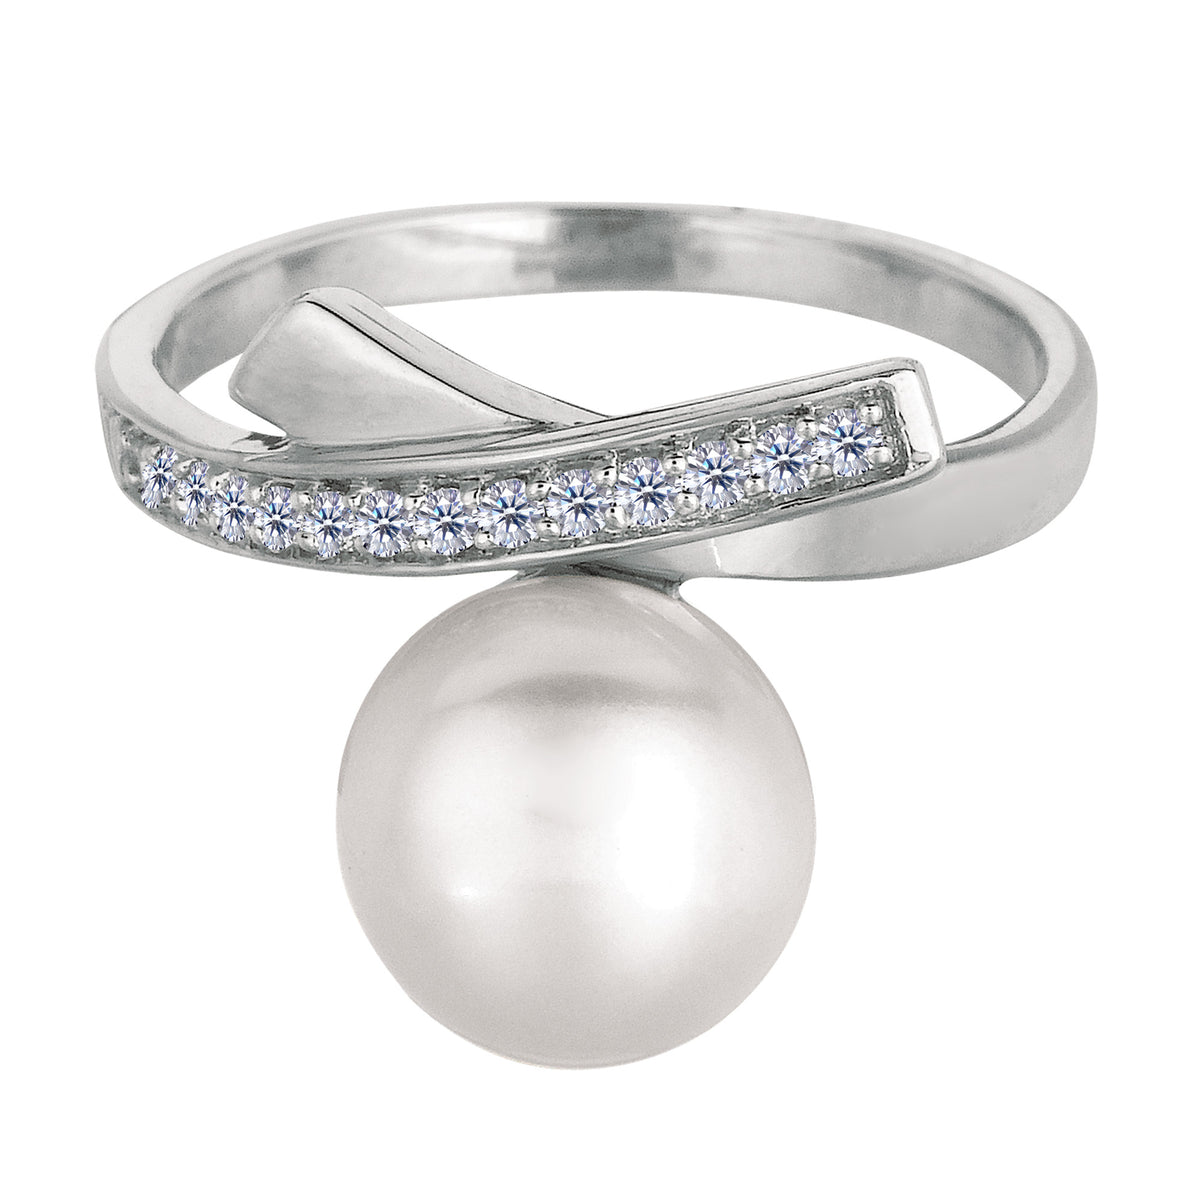 Sterling Silver With Rhodium Finish Cross Over Design Pearl And Cubic Zirconia Ring fine designer jewelry for men and women